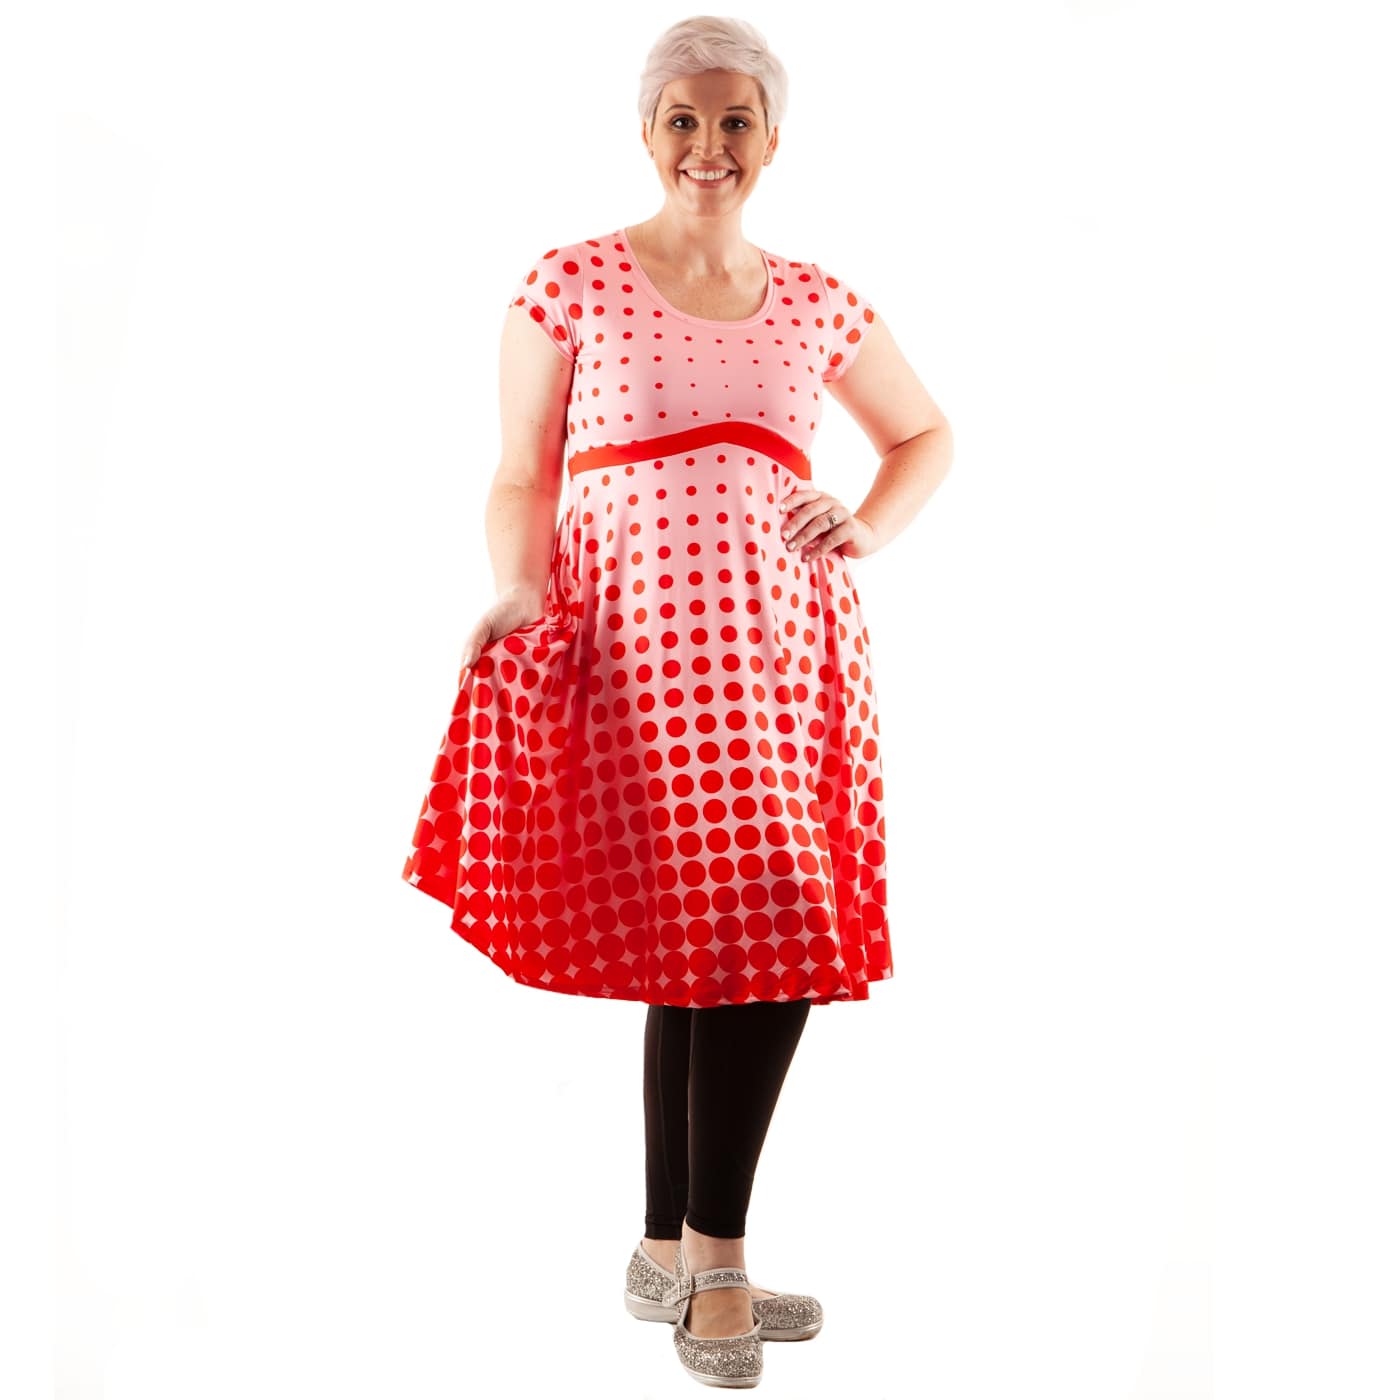 Blush Tea Dress by RainbowsAndFairies.com (Red Pink - Polka Dot - Psychedelic - Dress With Pockets - Pin Up - Rockabilly - Rock & Roll) - SKU: CL_TEADR_BLUSH_ORG - Pic 06